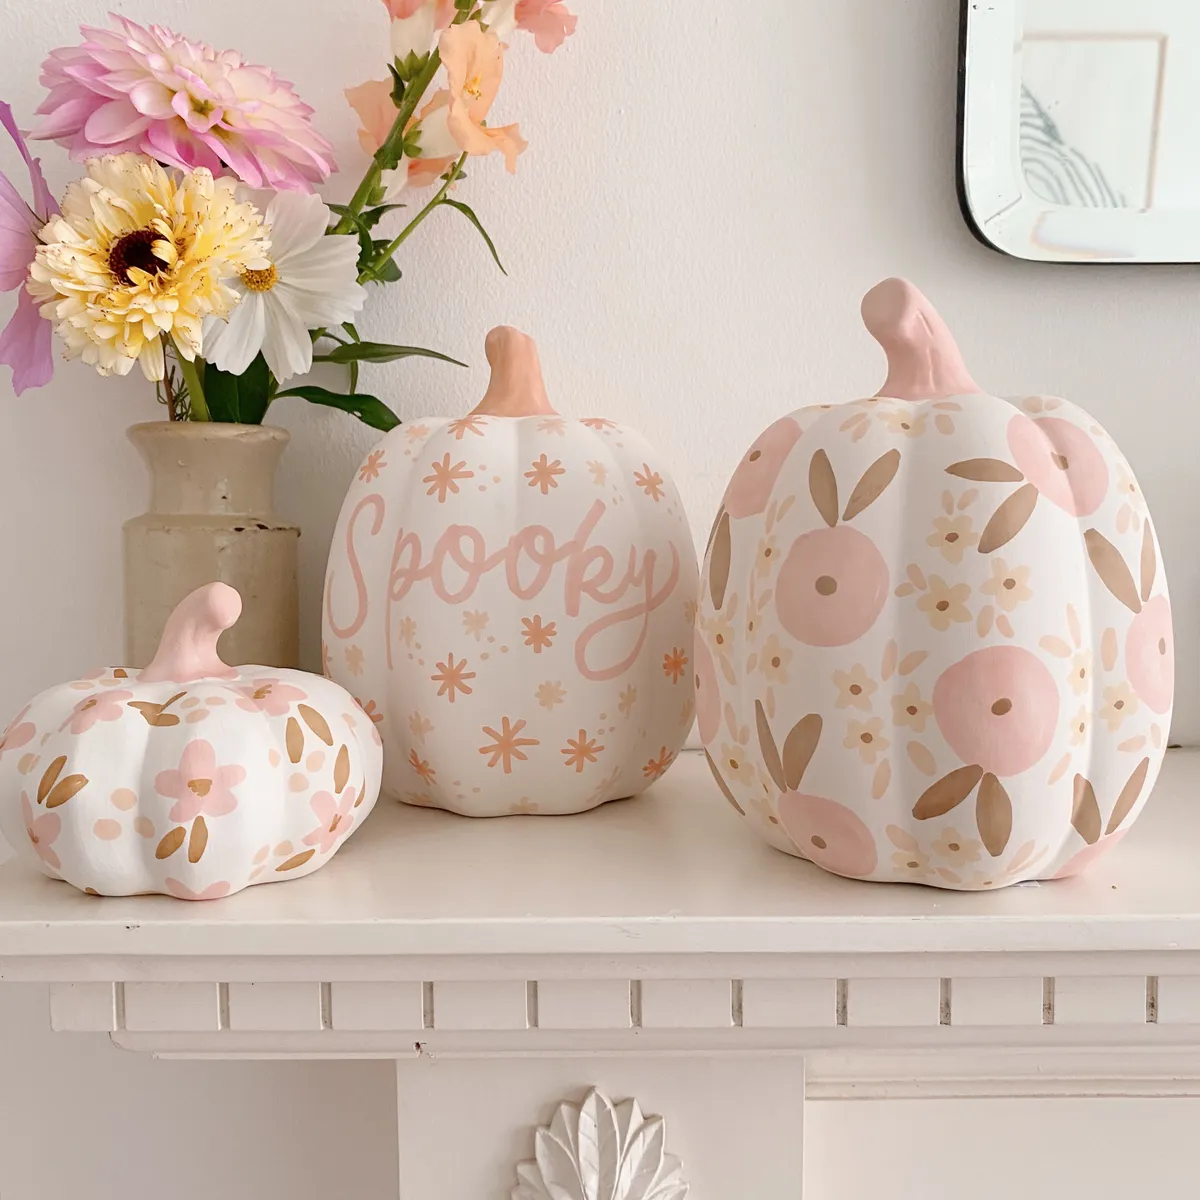 How to paint pumpkins